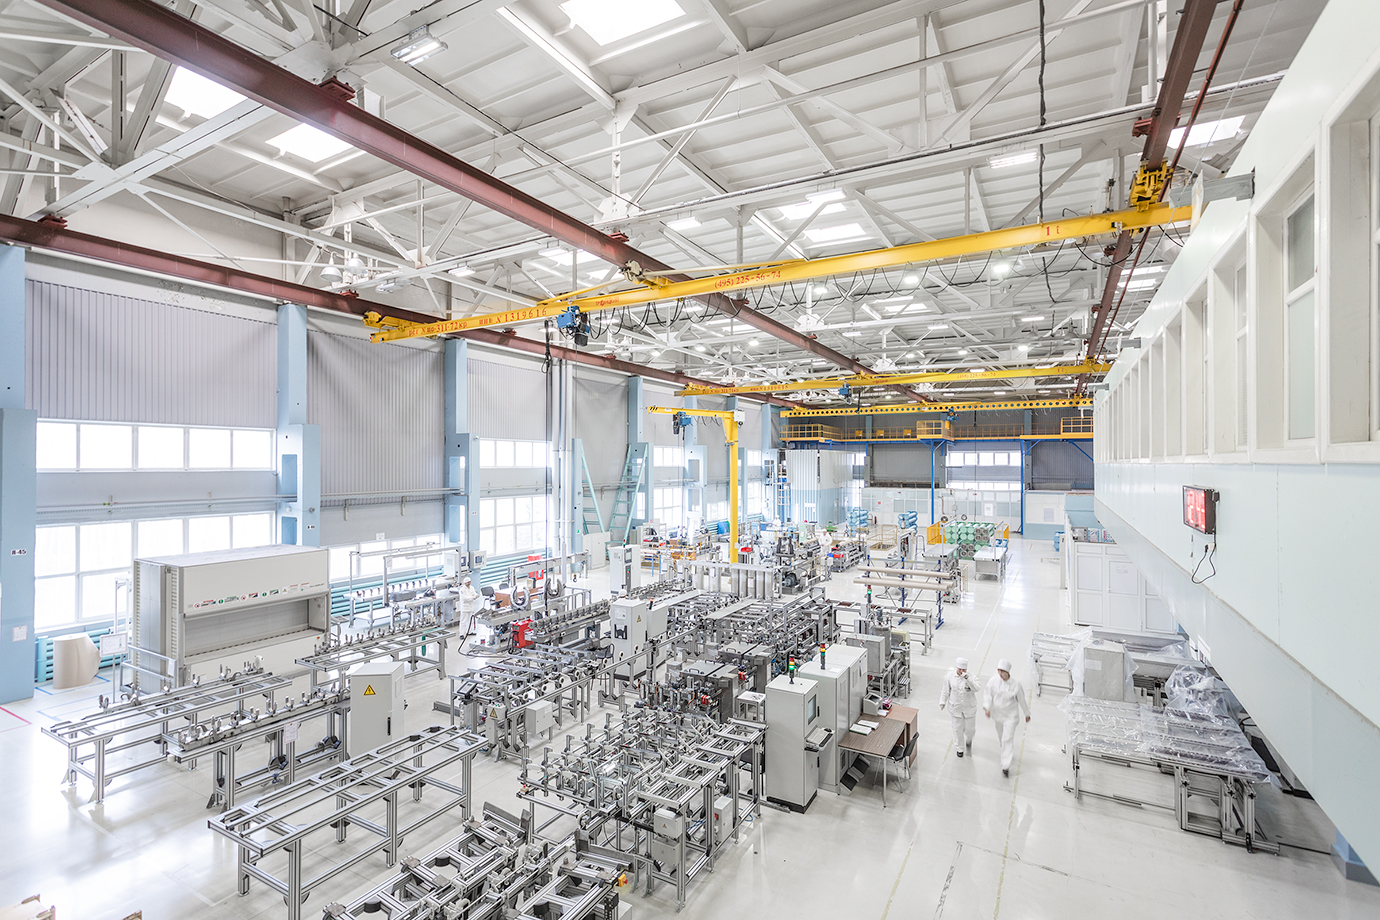 TVEL’s Elemash Machine-building plant launches new manufacturing site for CFR-600 fabrication